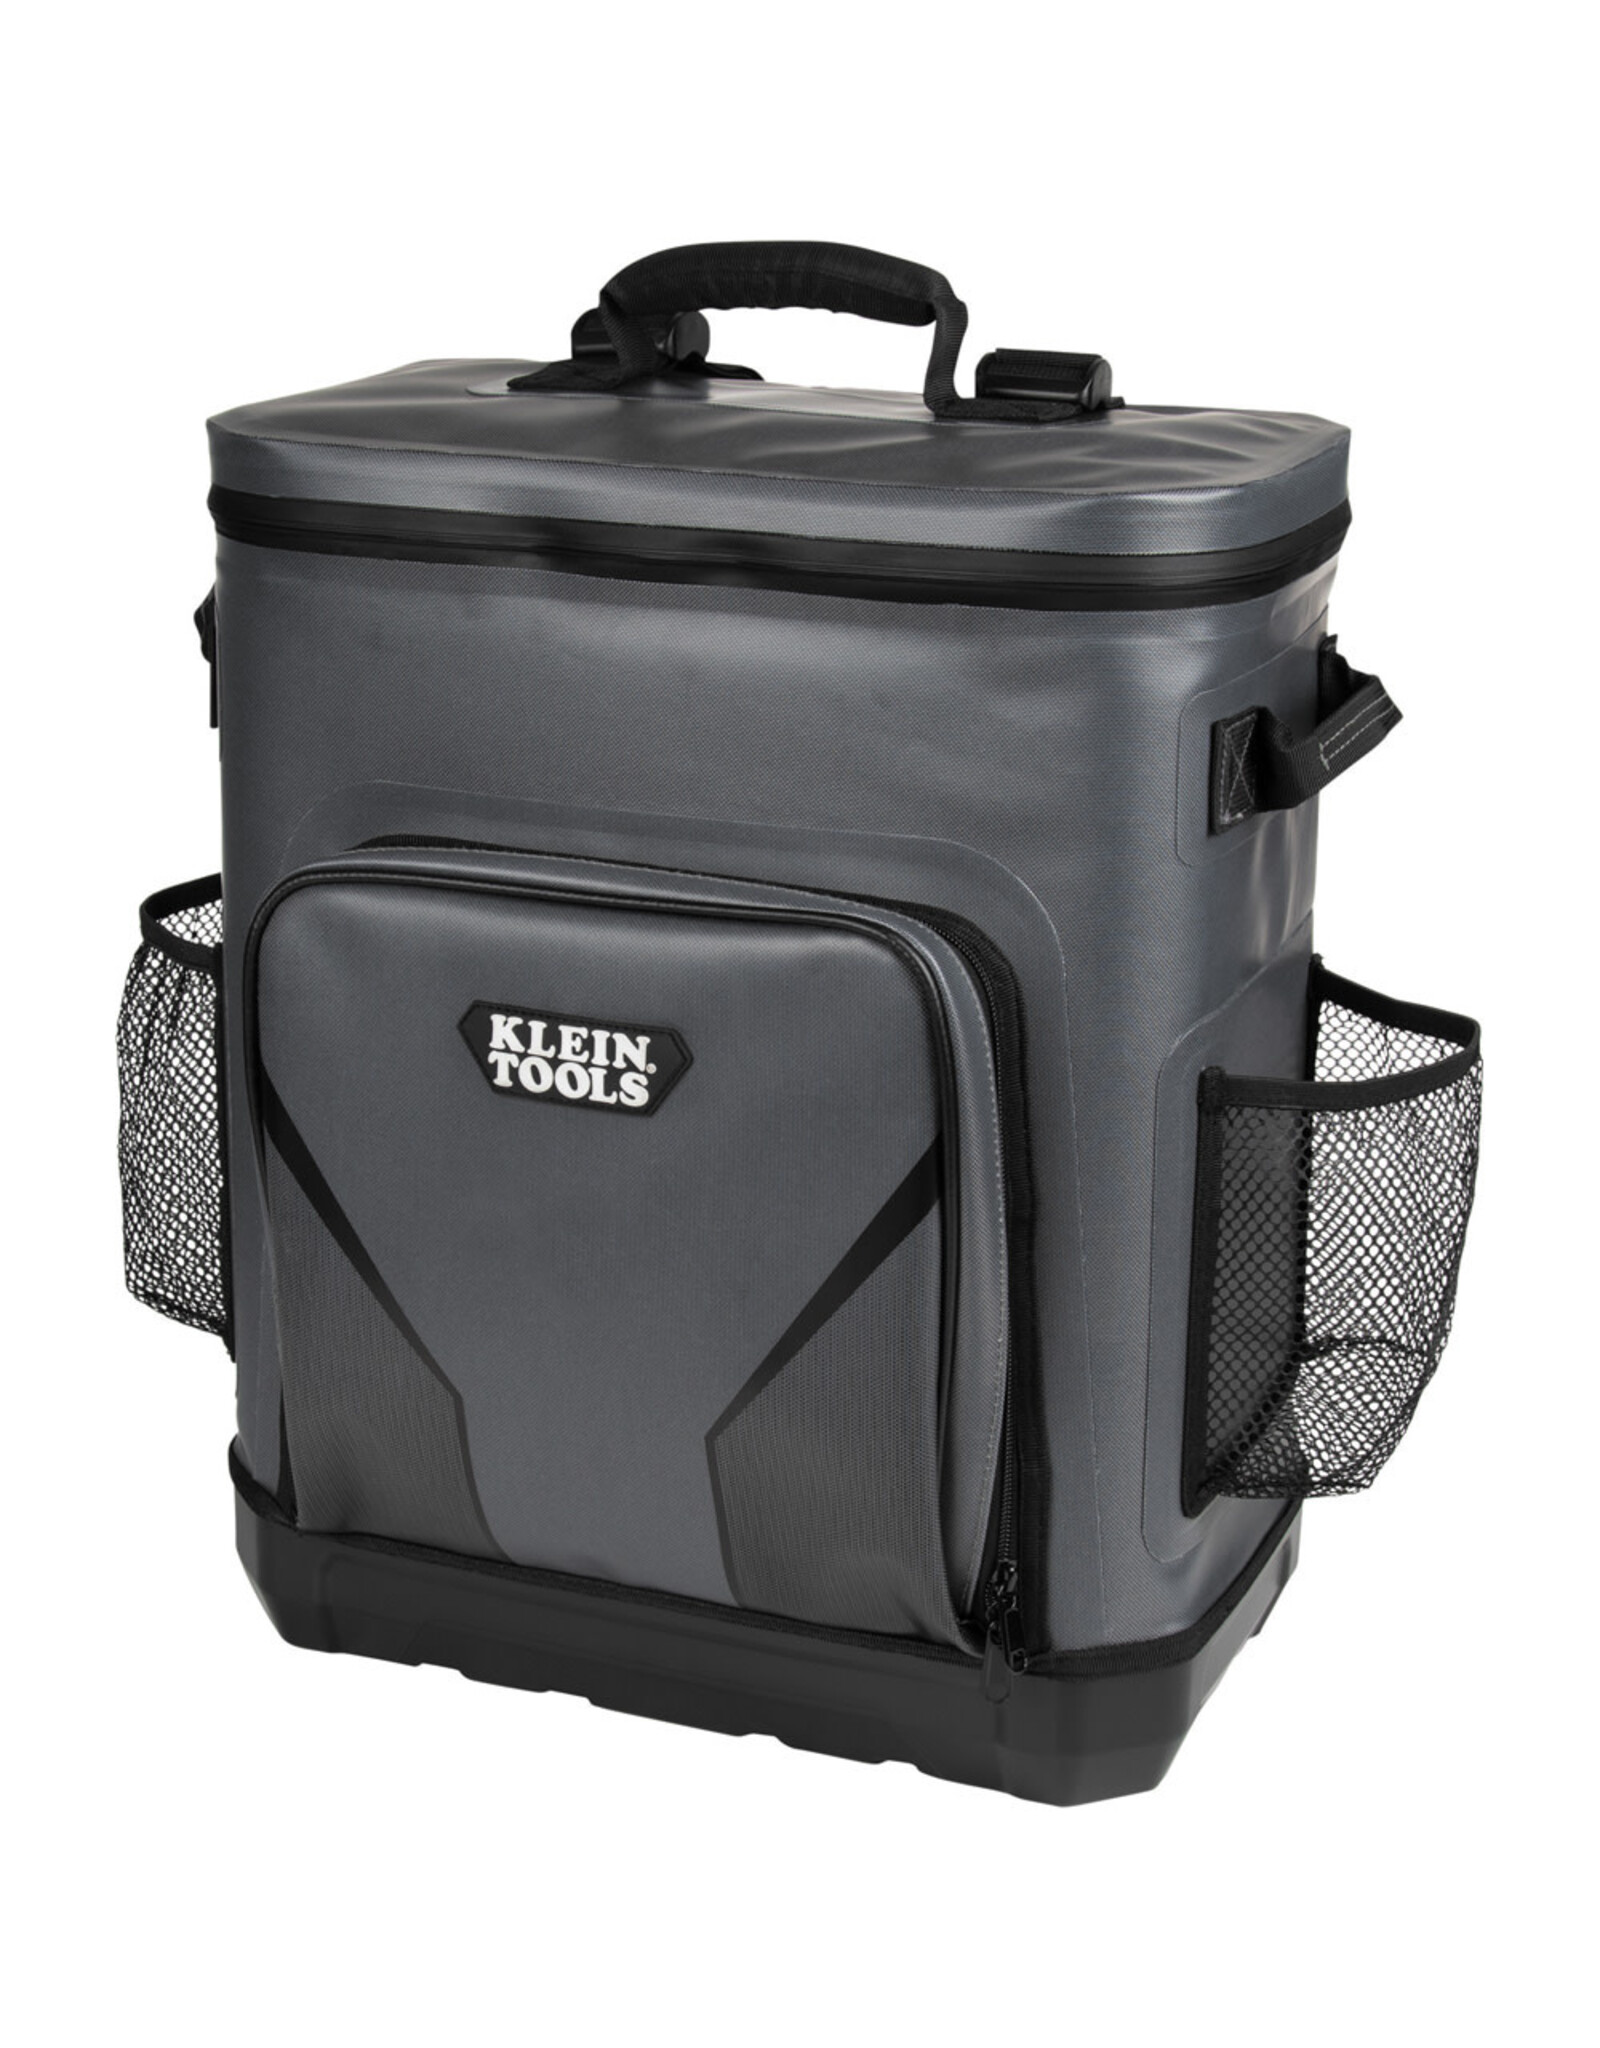 Klein Tools Backpack Cooler, Insulated, 30 Can Capacity